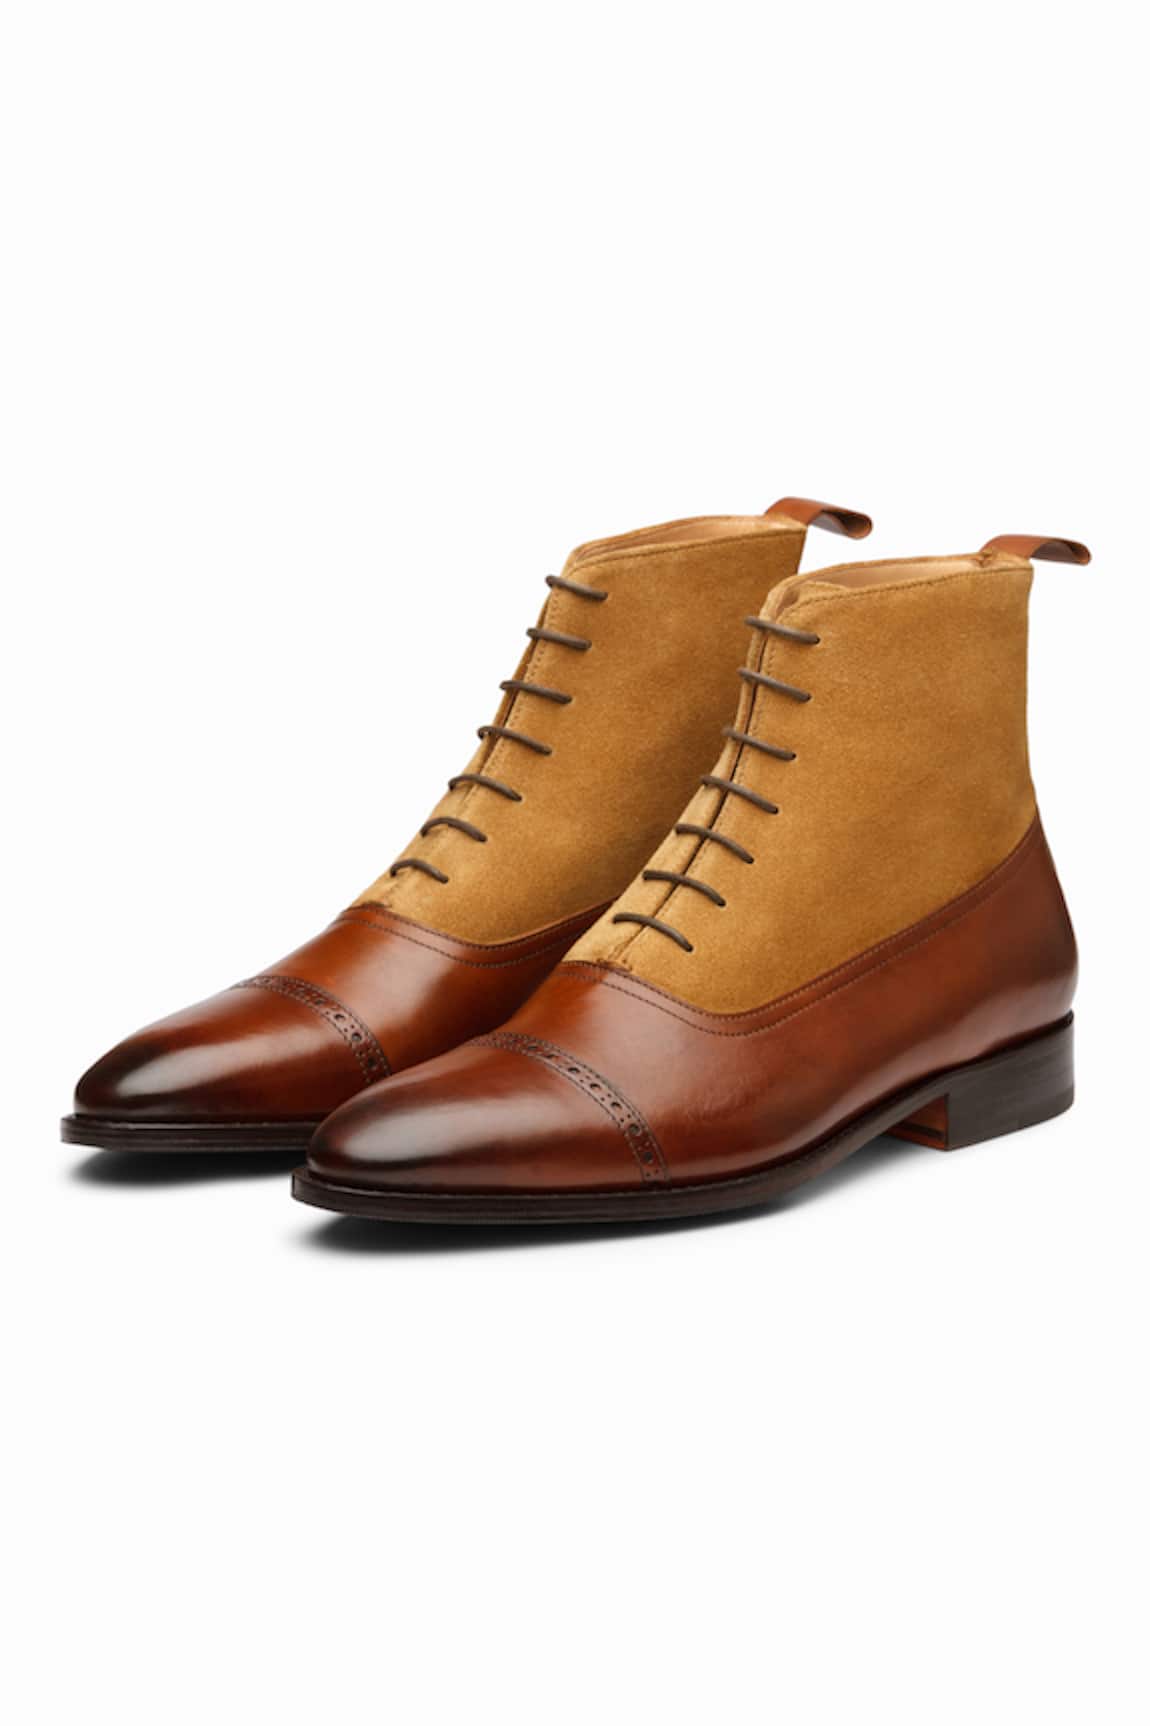 3DM LIFESTYLE Two Tone Balmoral Leather Boots